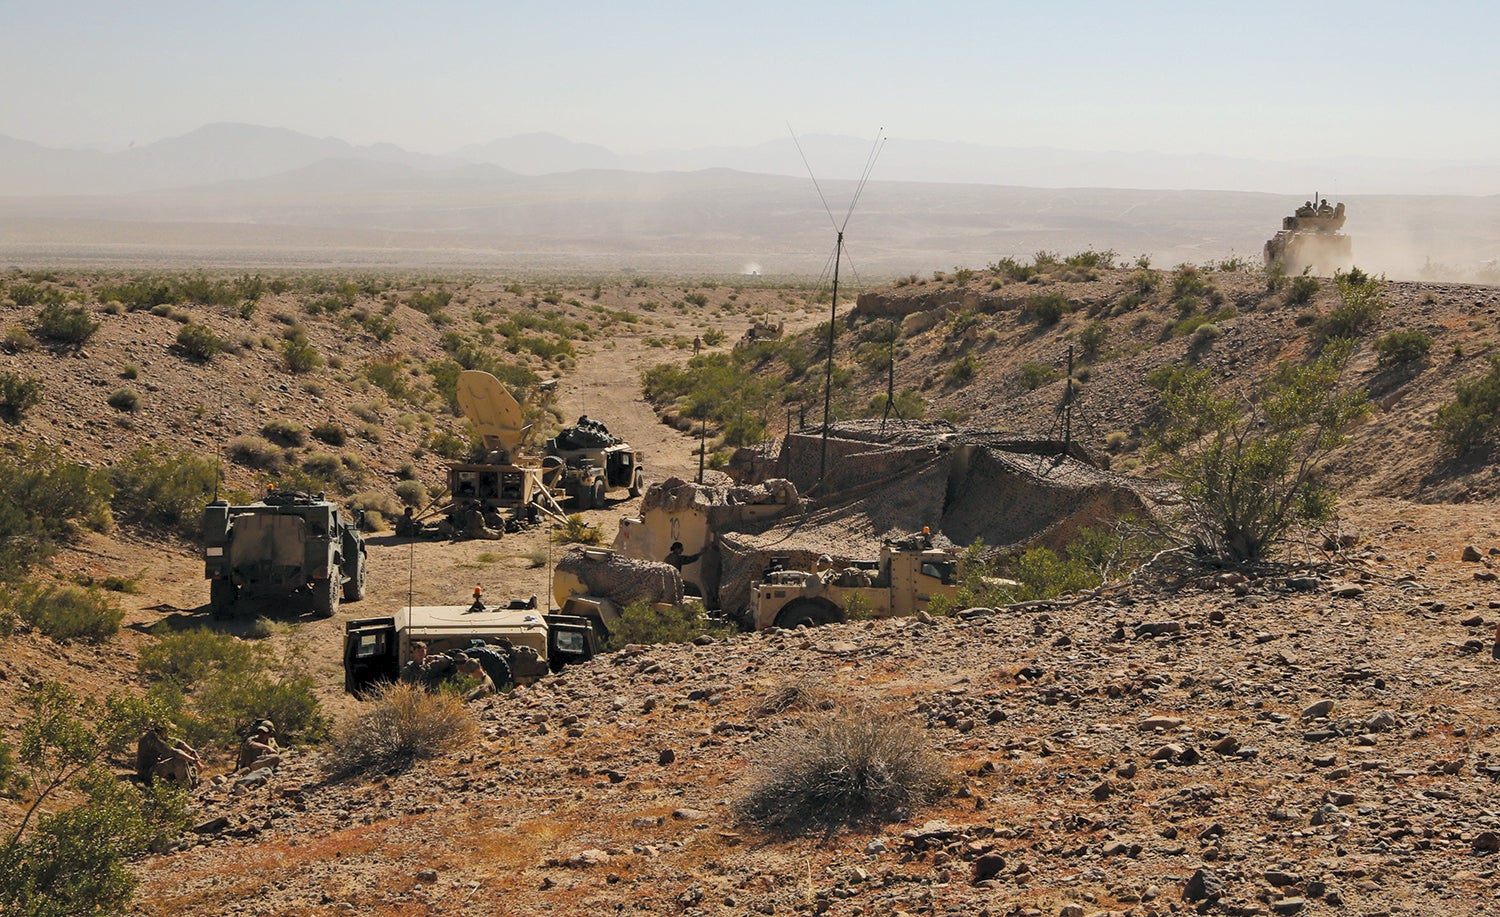 The command post of the 4th Squadron, 10th Cavalry Regiment, as set up at the National Training Center, Fort Irwin, California. (Credit: U.S. Army)